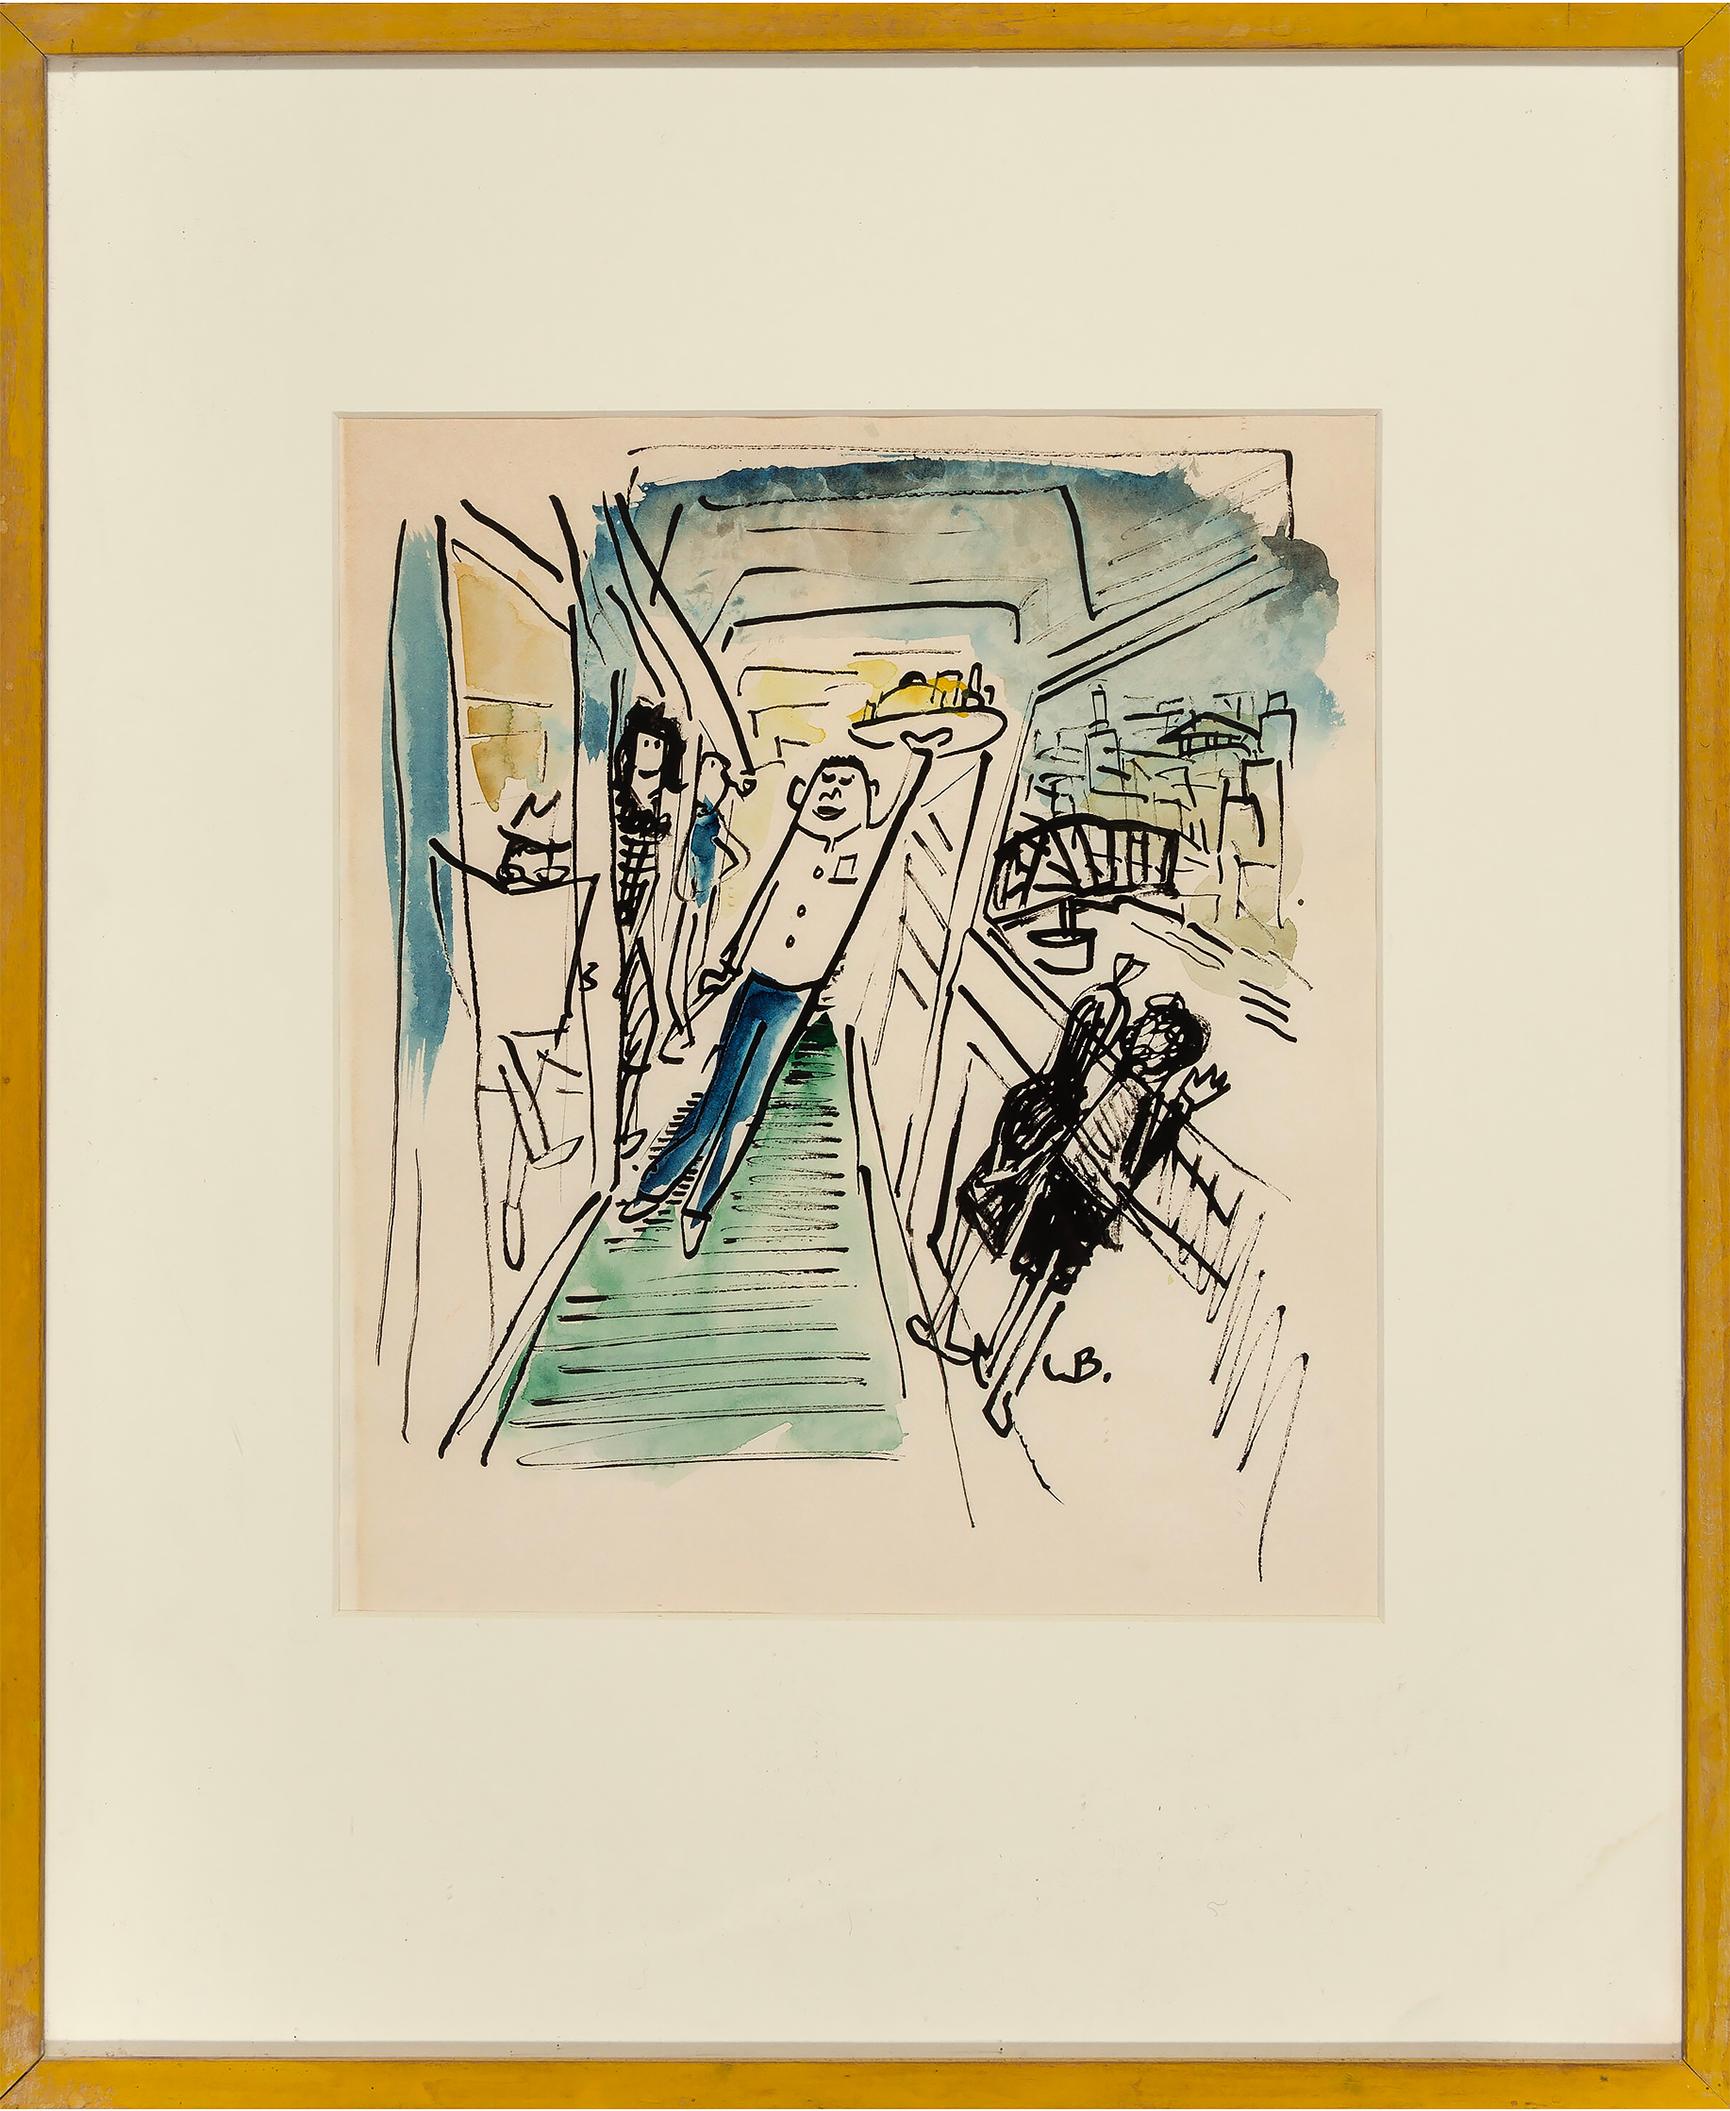 Waiter Dancing and Strutting on a Ship, Possible Madeline sighting - Art by Ludwig Bemelmans